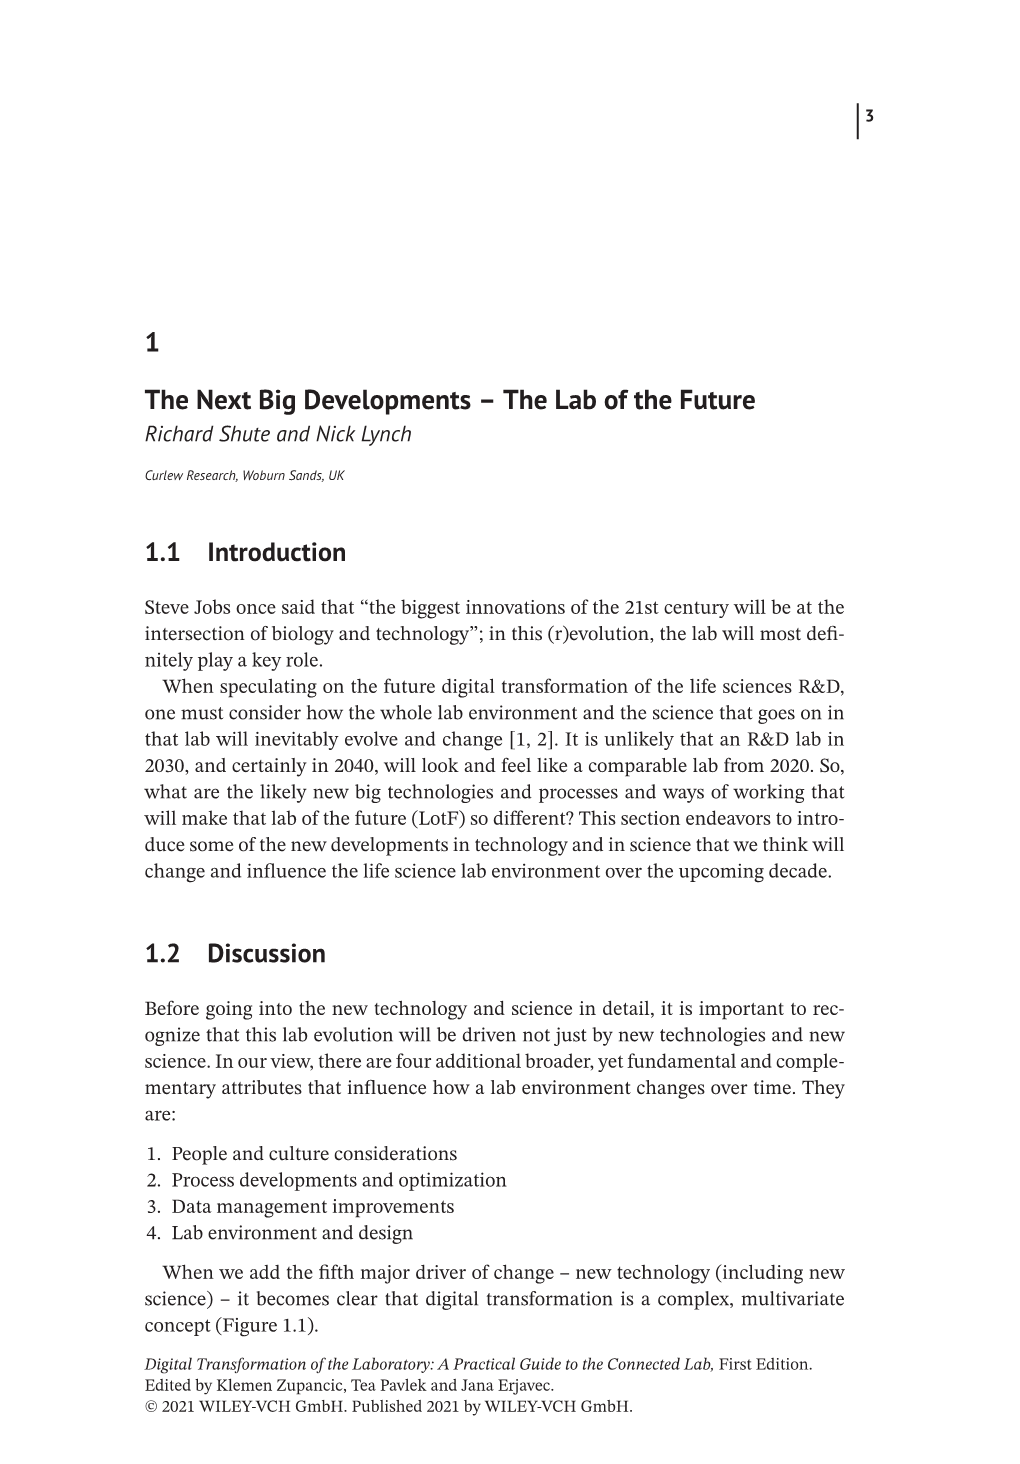 1 the Next Big Developments – the Lab of the Future